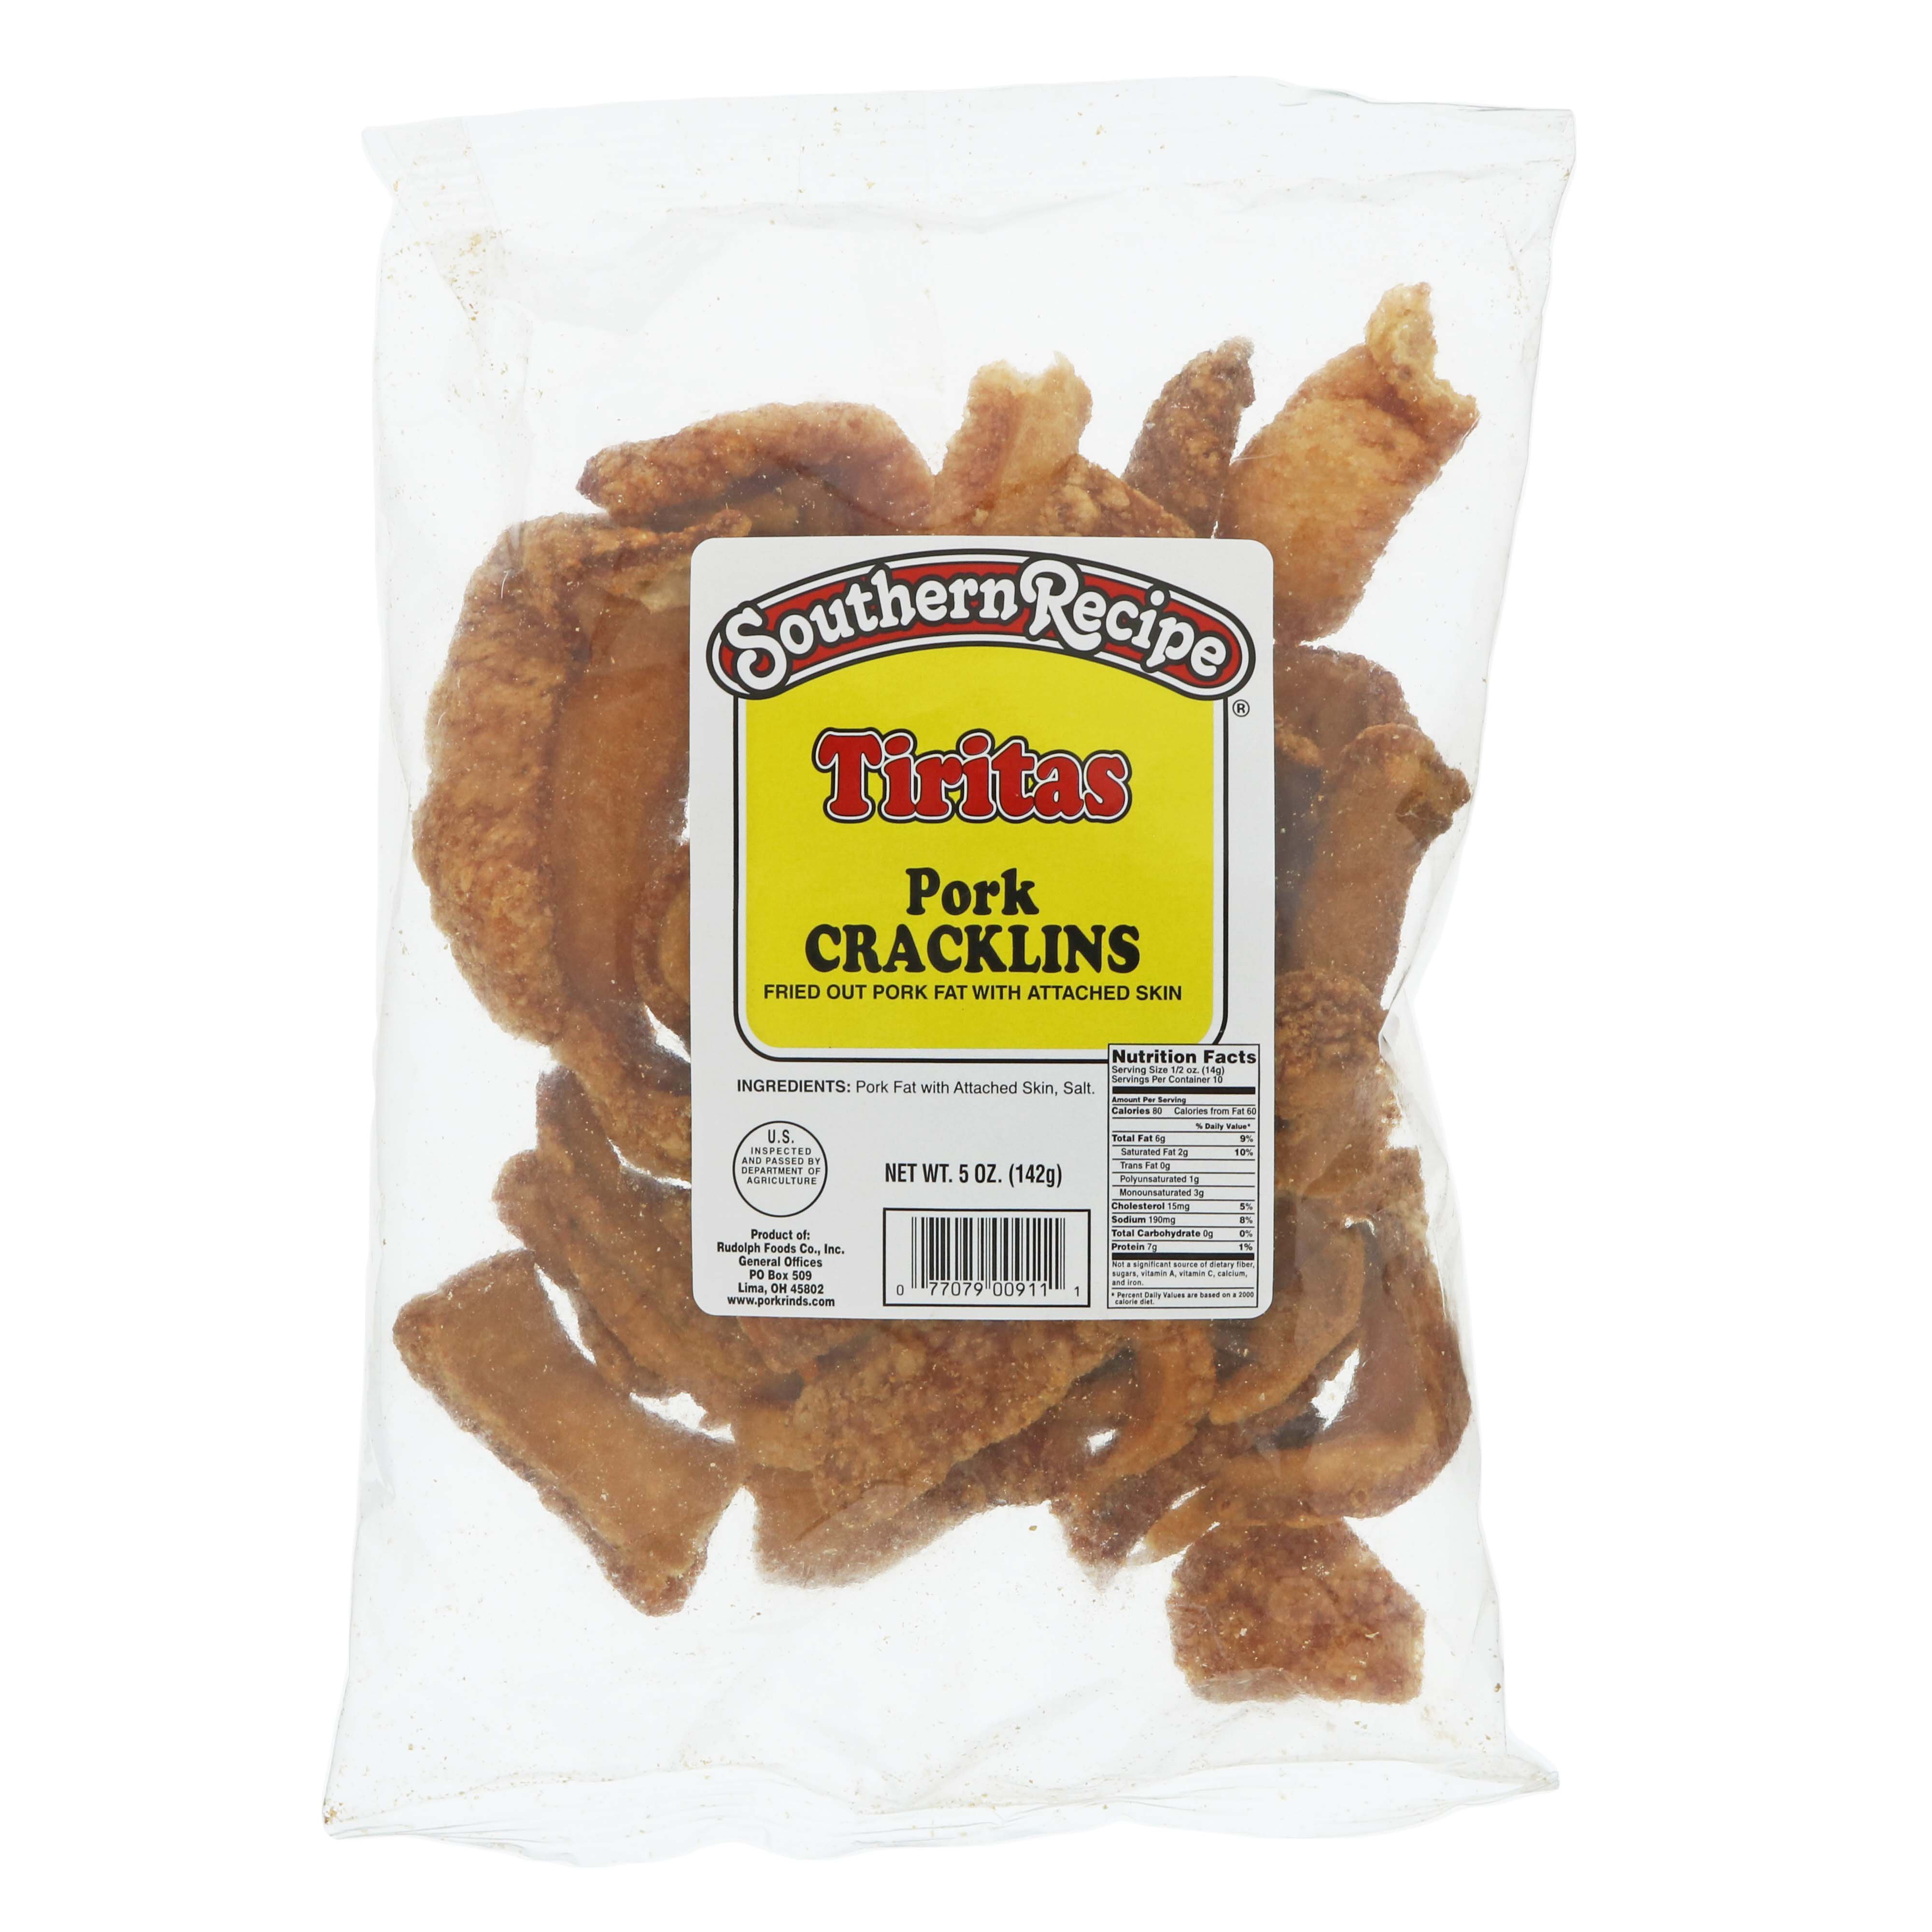 Southern Recipe Tiritas Pork Cracklins Shop Chips At H E B,What Is Msg